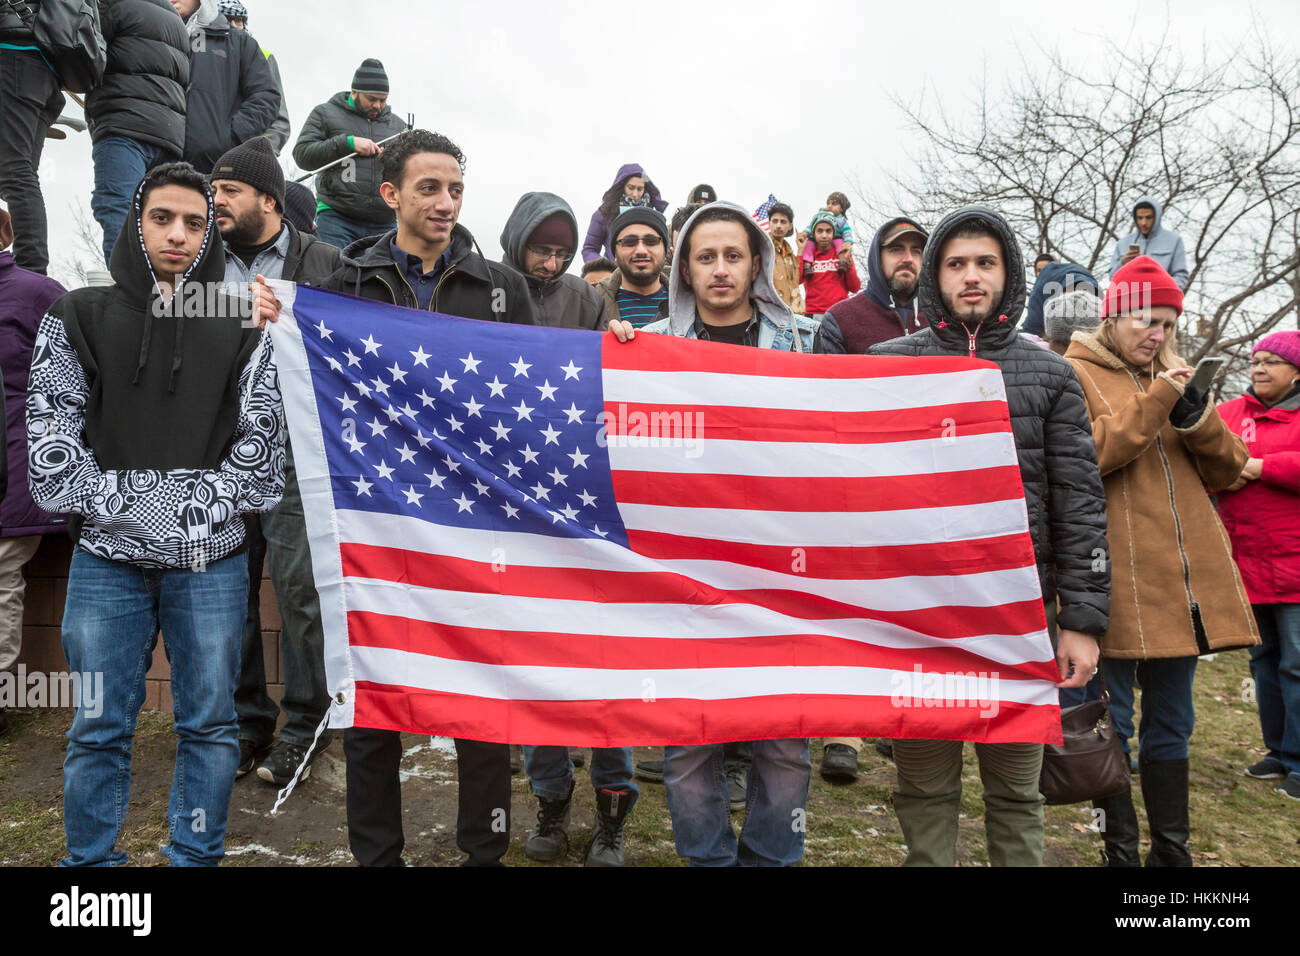 Hamtramck, USA. 29th January, 2017. Hundreds, including these young immigrants from Yemen, rallied at Hamtramck City Hall against President Trump's ban on immigration from seven Muslim nations. Hamtramck is a city of immigrants, a large number of whom are from Yemen. The city is governed by a Muslim-majority city council and is a sanctuary city. Credit: Jim West/Alamy Live News Stock Photo